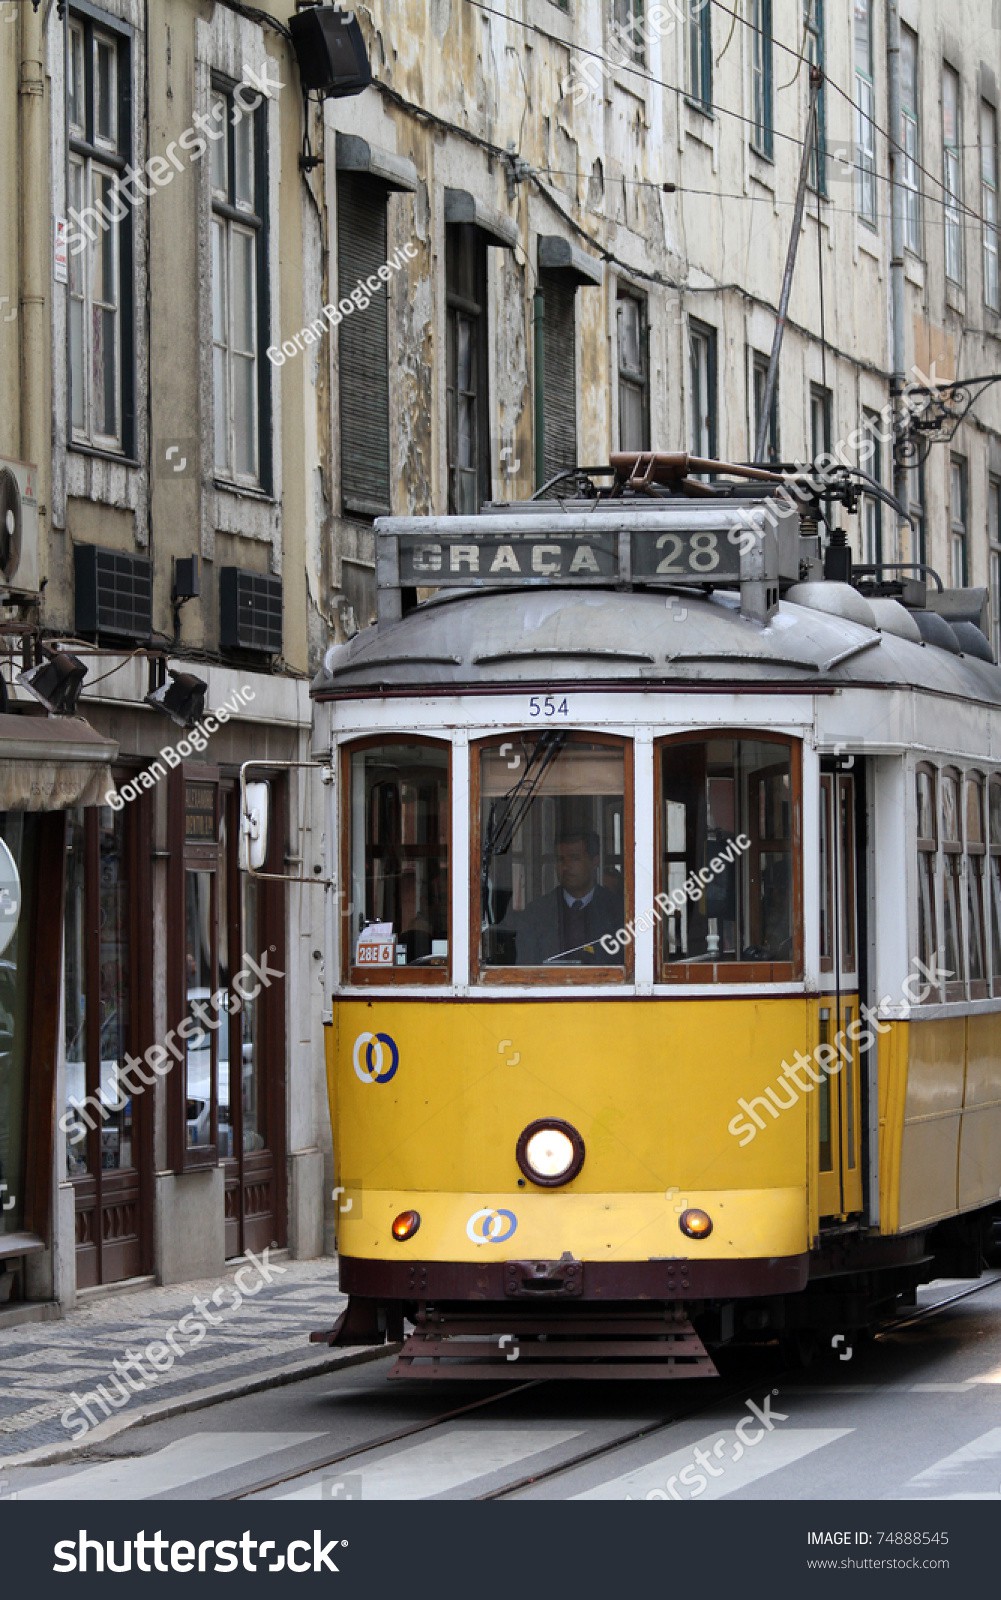 Stock-photo-lisbon-portugal-march-old-yellow-tram-on-the-street-of-lisbon-portugal-at-march-74888545.jpg